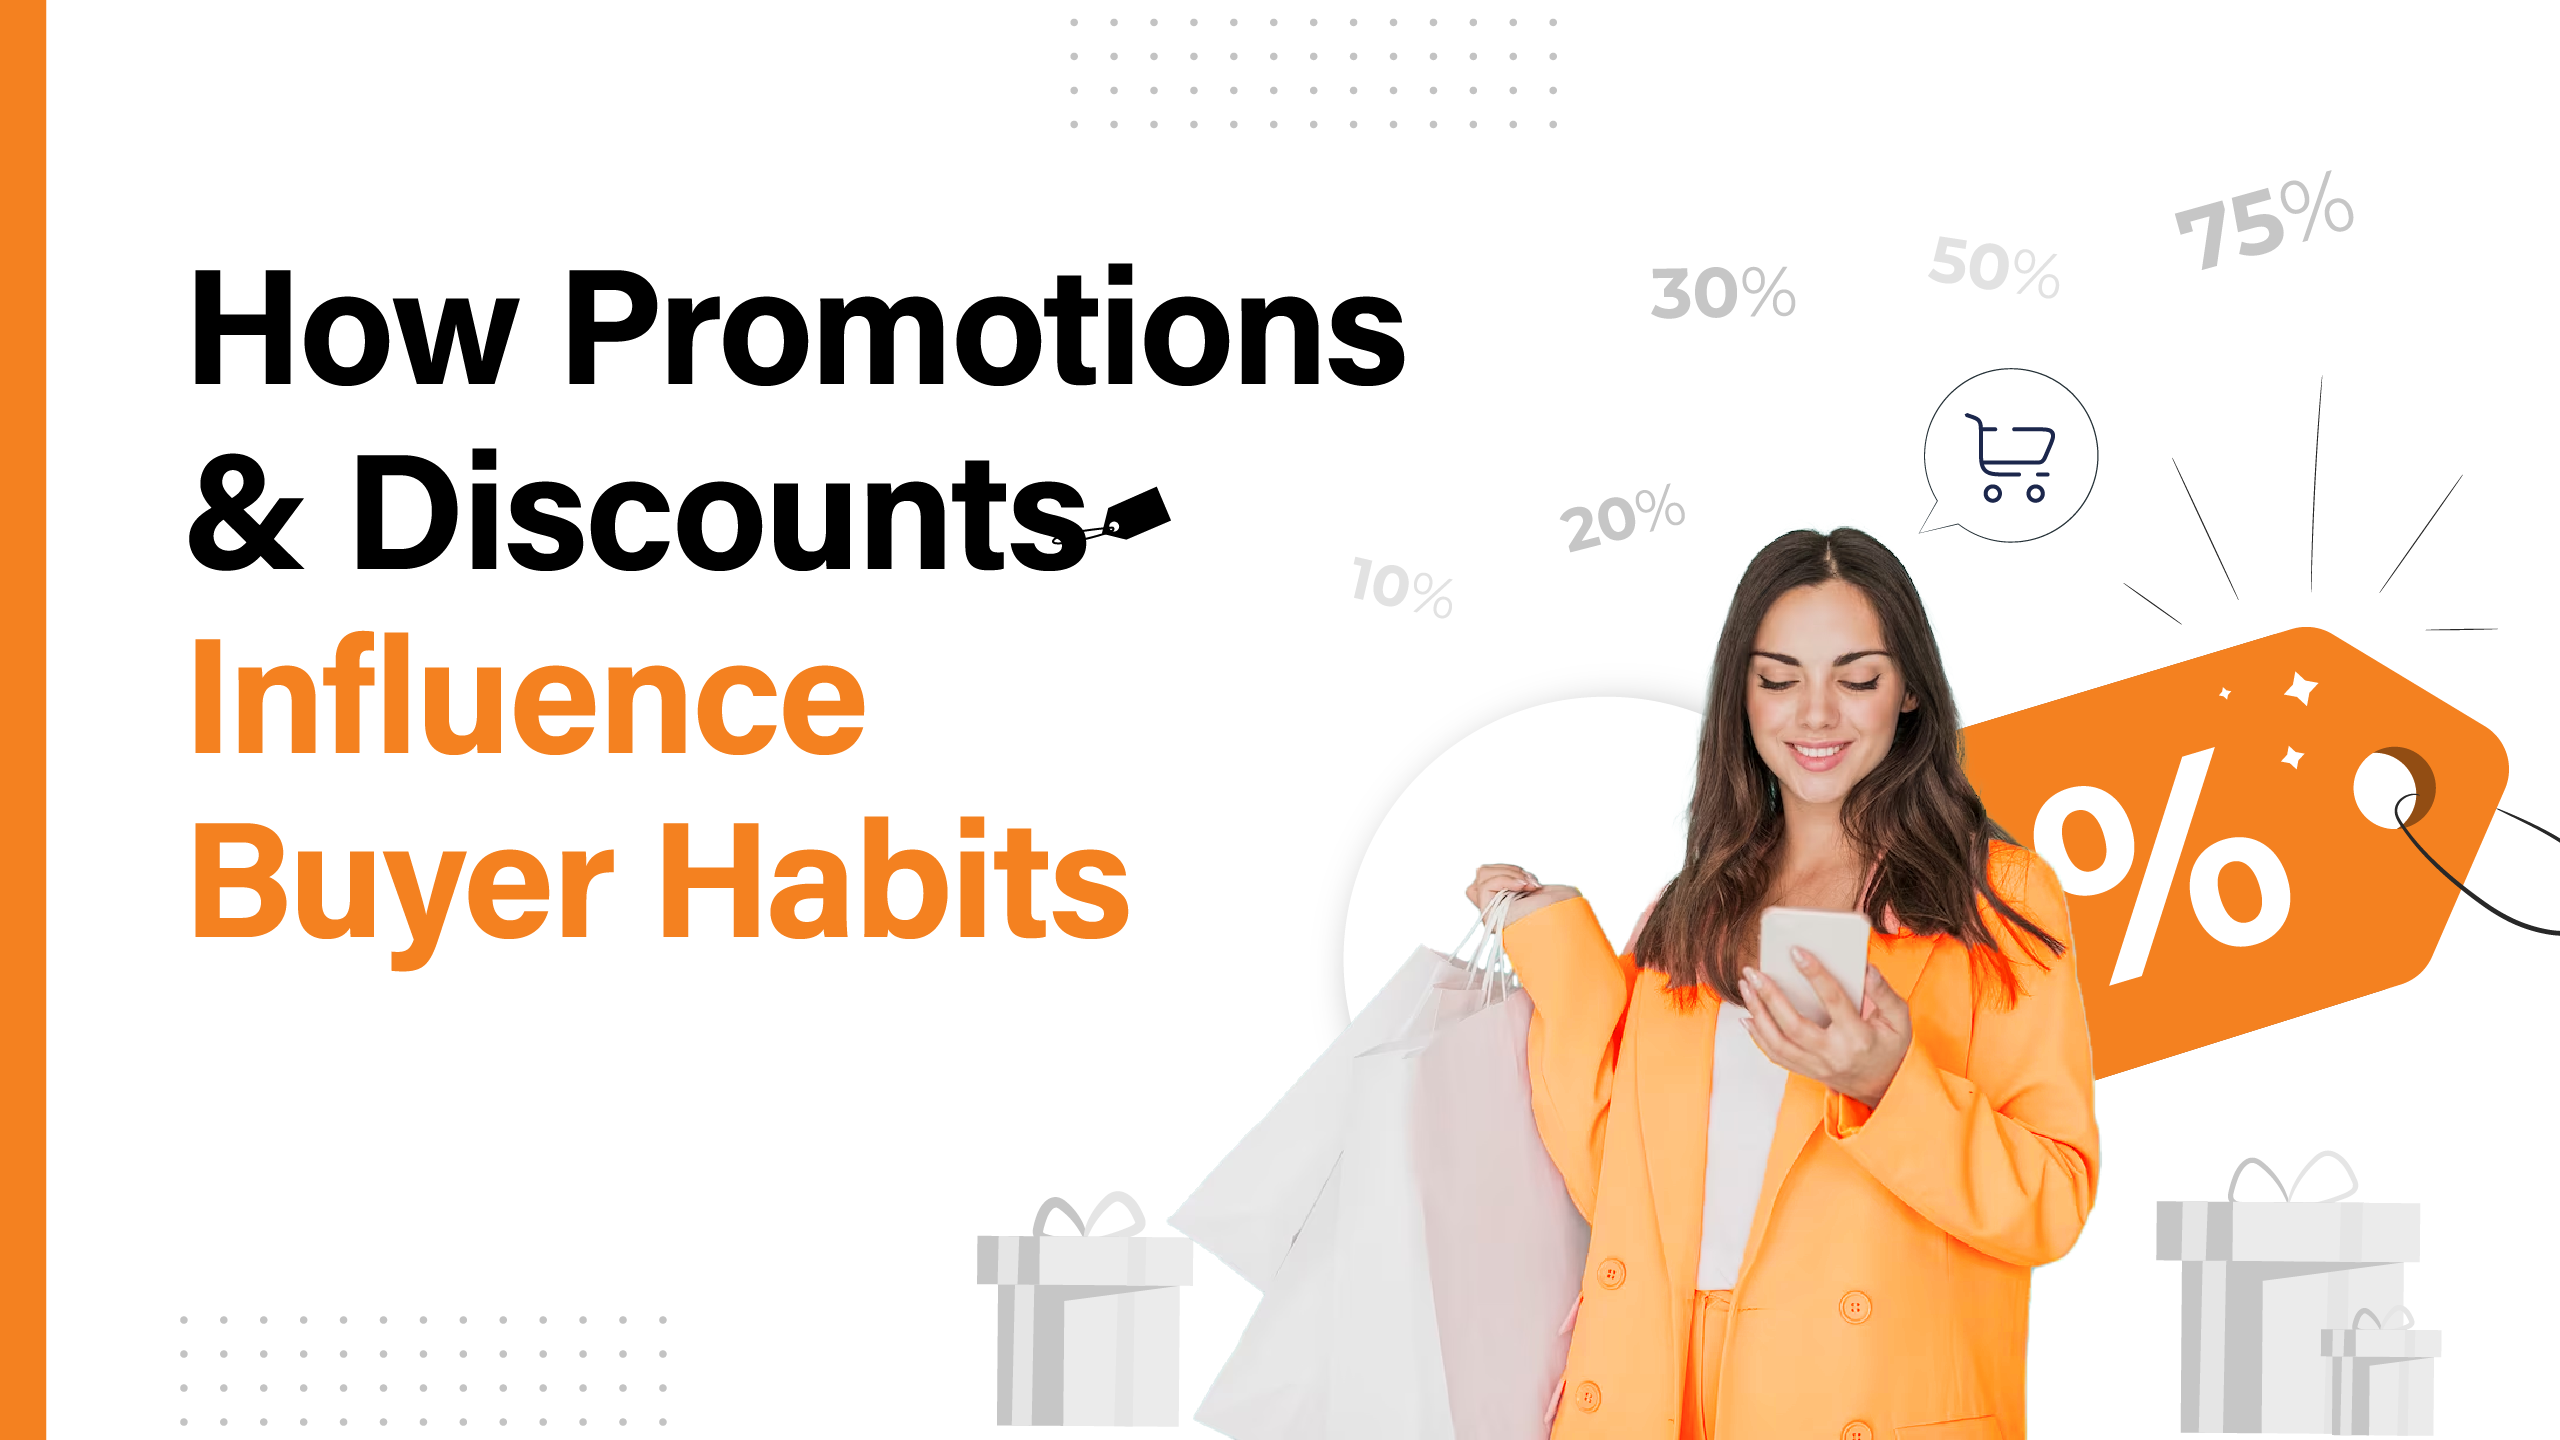 How Promotions & Discounts Influence Buyer Habits